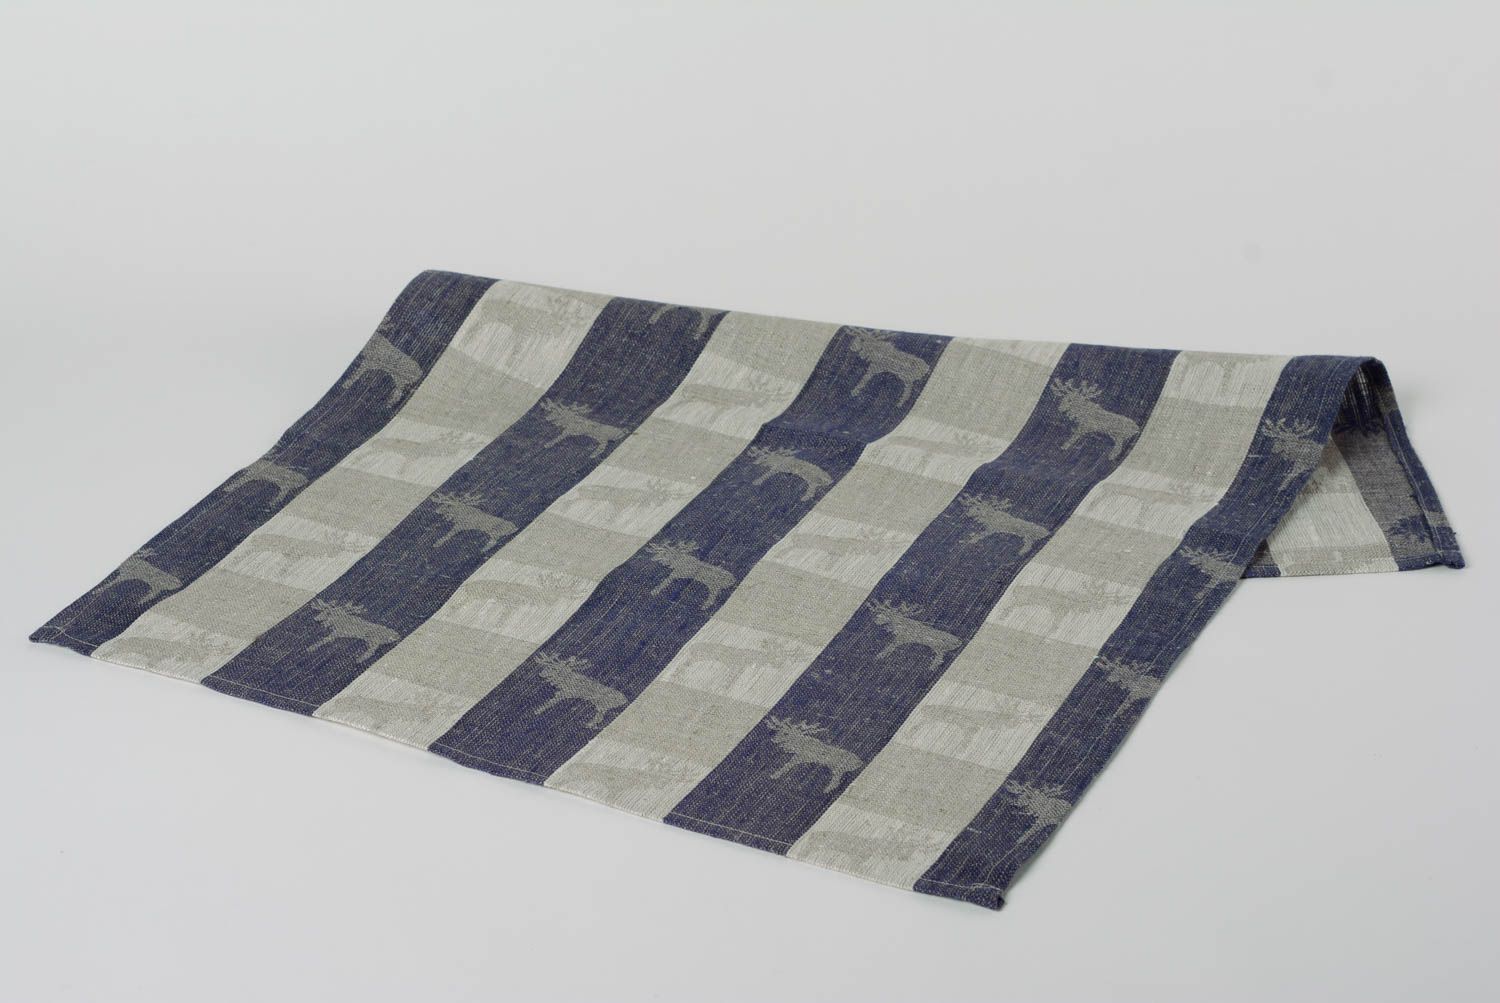 Handmade kitchen towel sewn of striped linen fabric in gray and blue colors photo 2